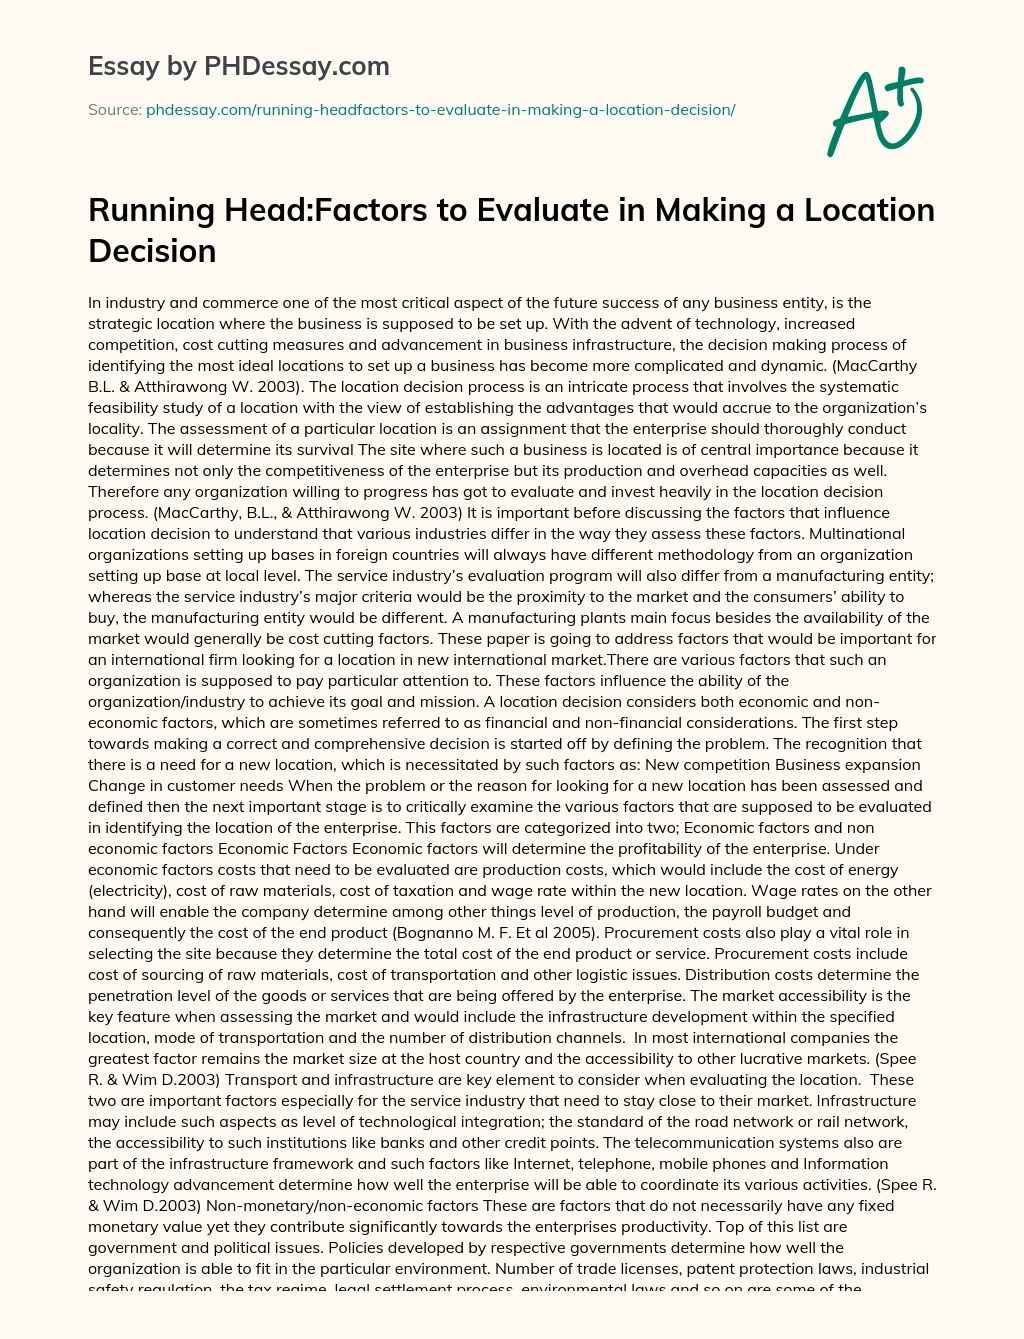 Running Head:Factors to Evaluate in Making a Location Decision essay